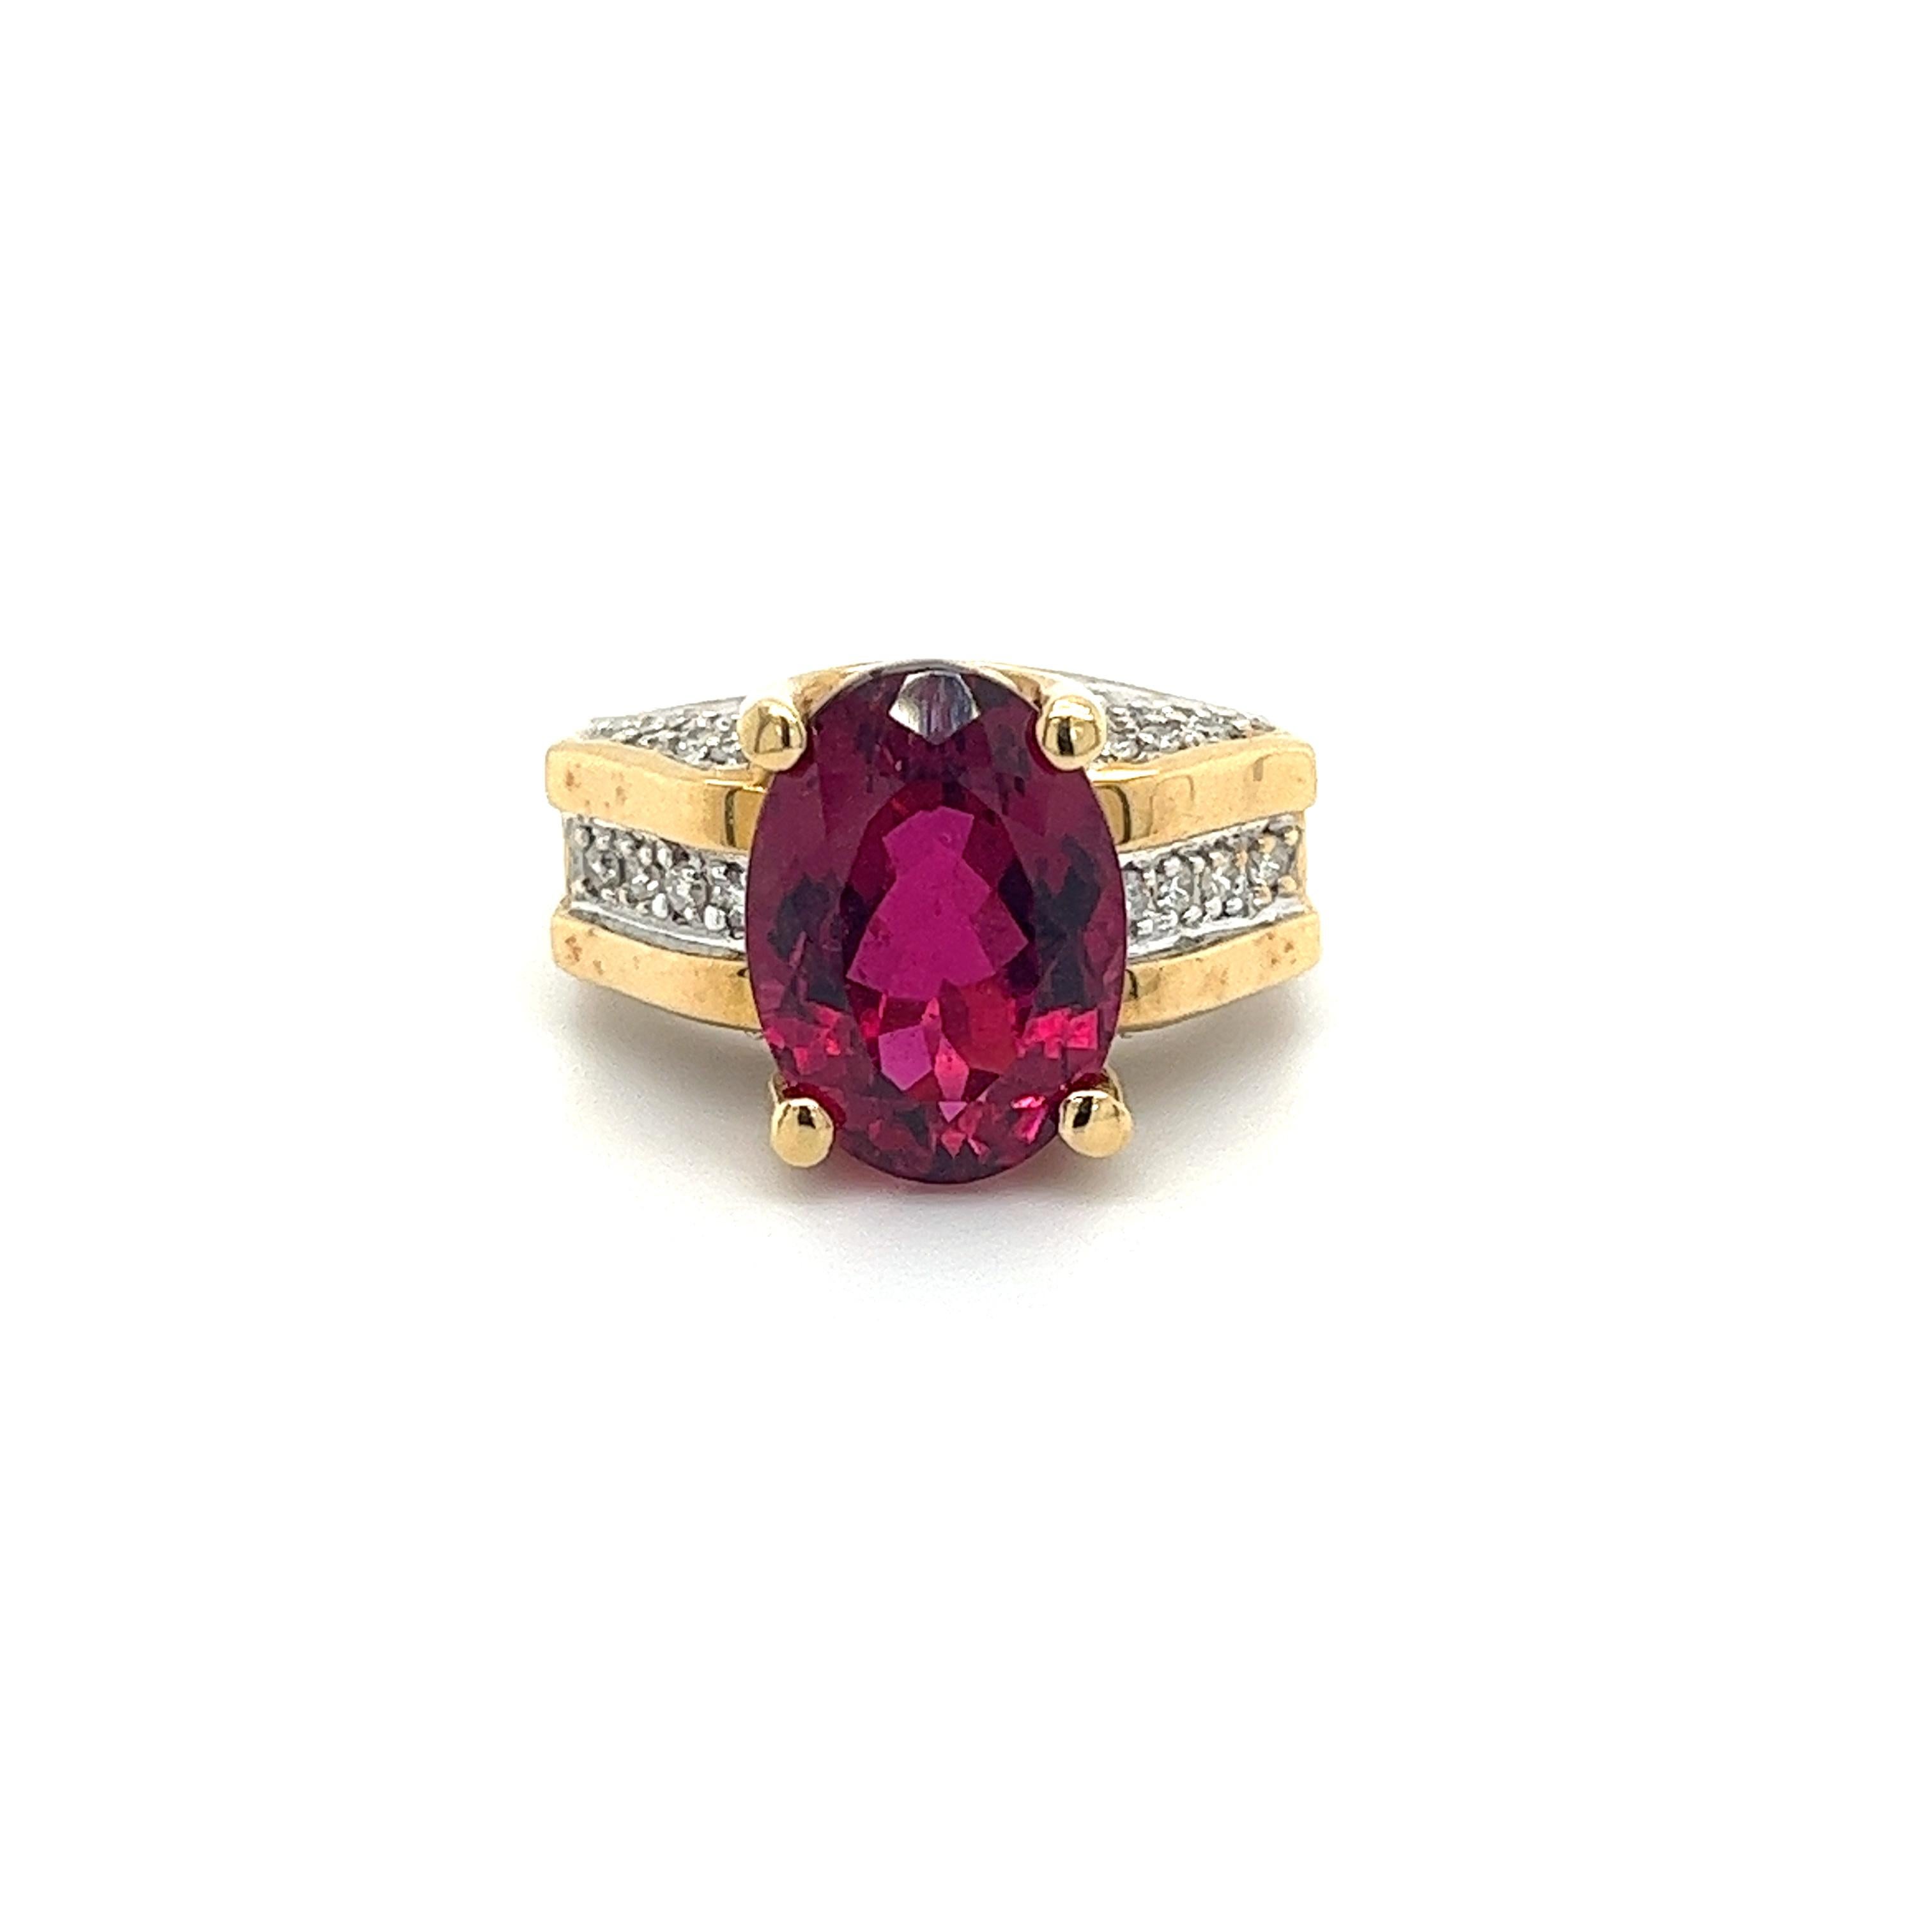 GIA Cert Oval Cut 7 Carat Purplish Red Tourmaline Ring with Diamond in 18K Gold For Sale 1